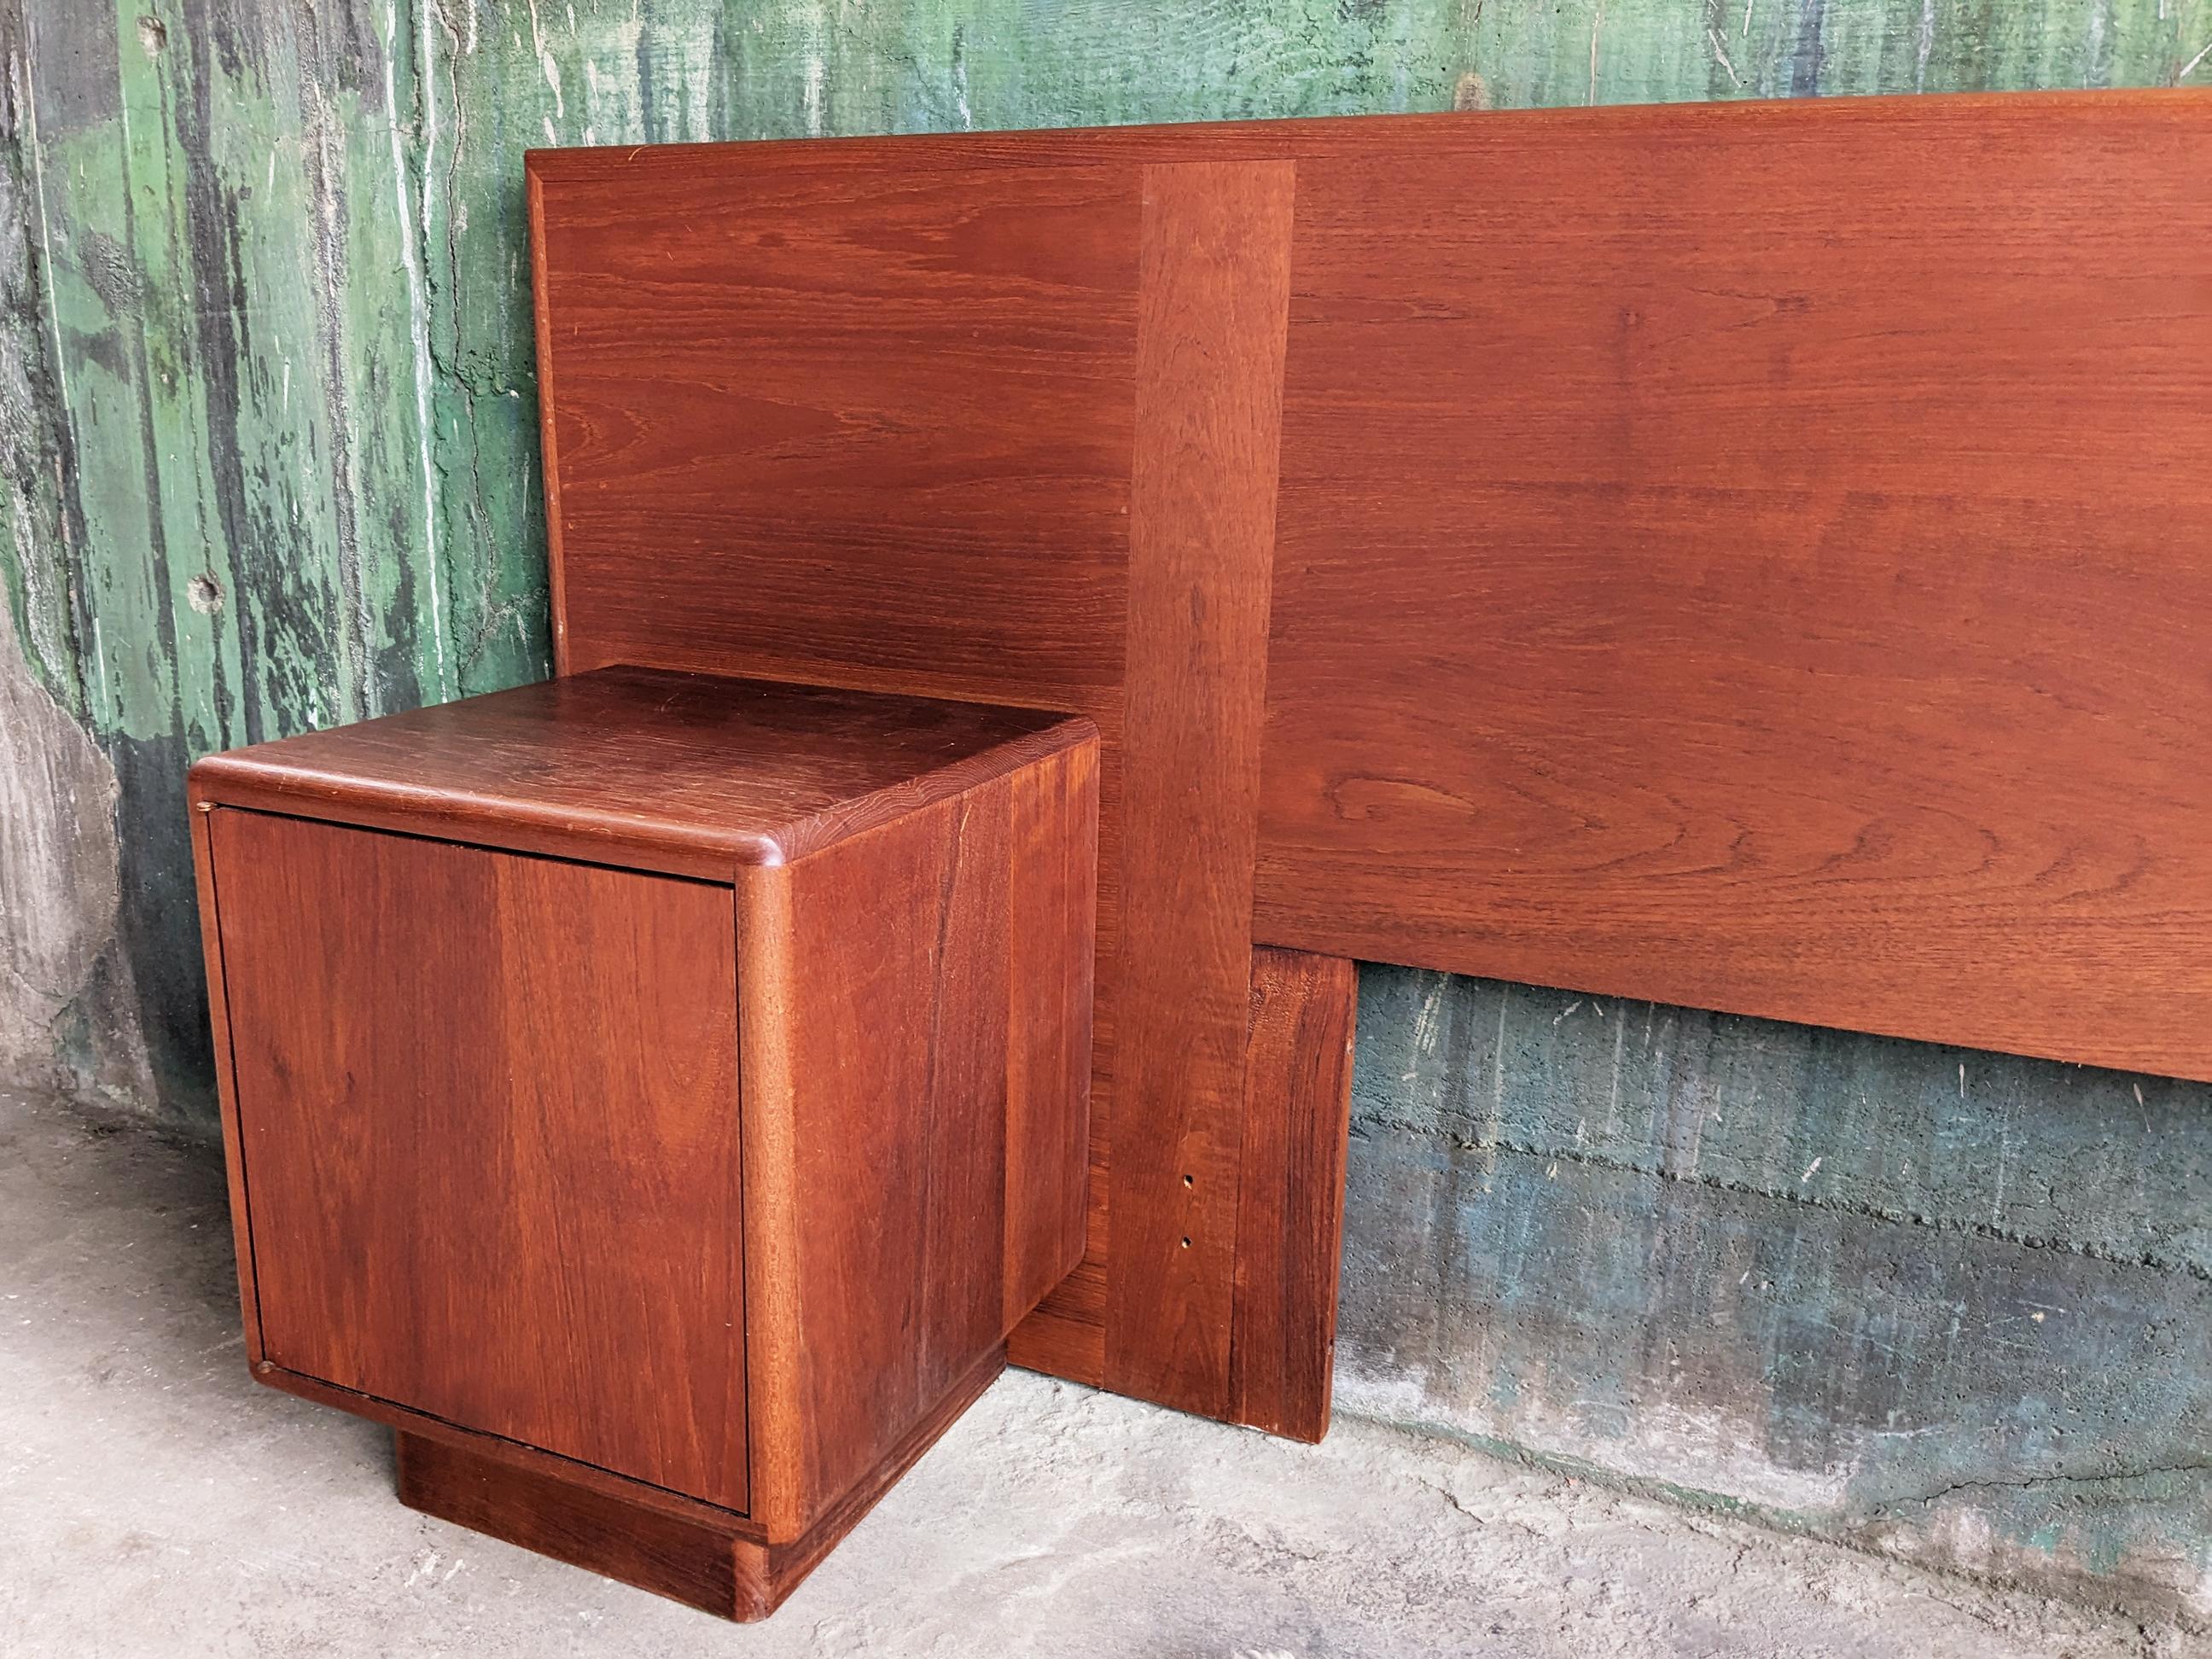 Danish MCM Long Rosewood Teak Headboard with Attached Storage Nightstands, 70s For Sale 1